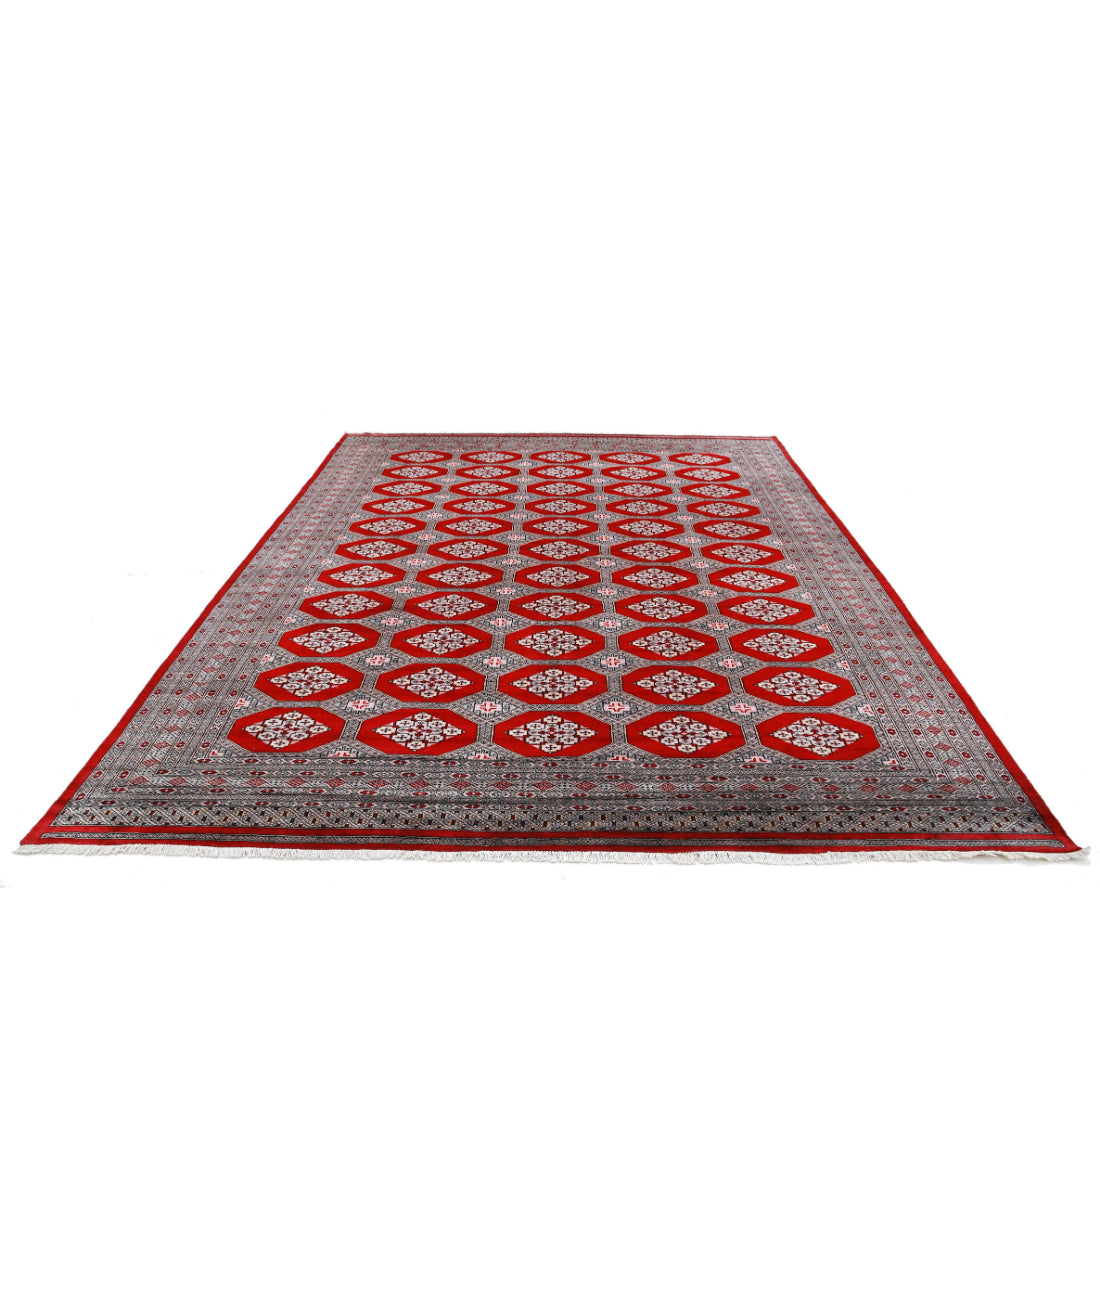 Hand Knotted Tribal Bokhara Wool Rug - 8'11'' x 11'7'' 8'11'' x 11'7'' (268 X 348) / Red / Blue